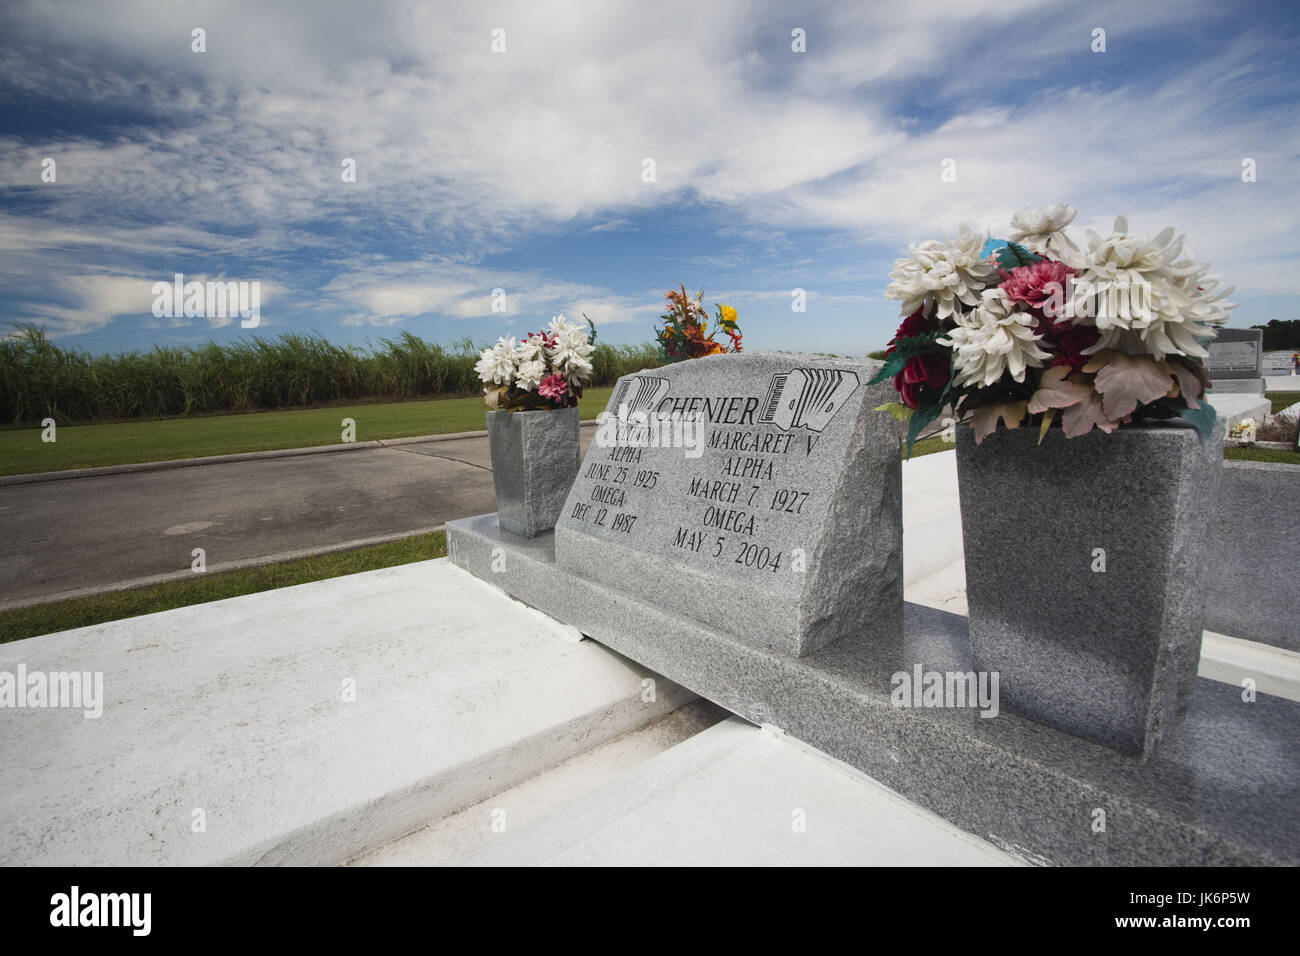 USA, Louisiana, Cajun Country, Loreauville, gravesite of Clifton Chenier, legendary zydeco accordionist, one of the fathers of modern zydeco music Stock Photo